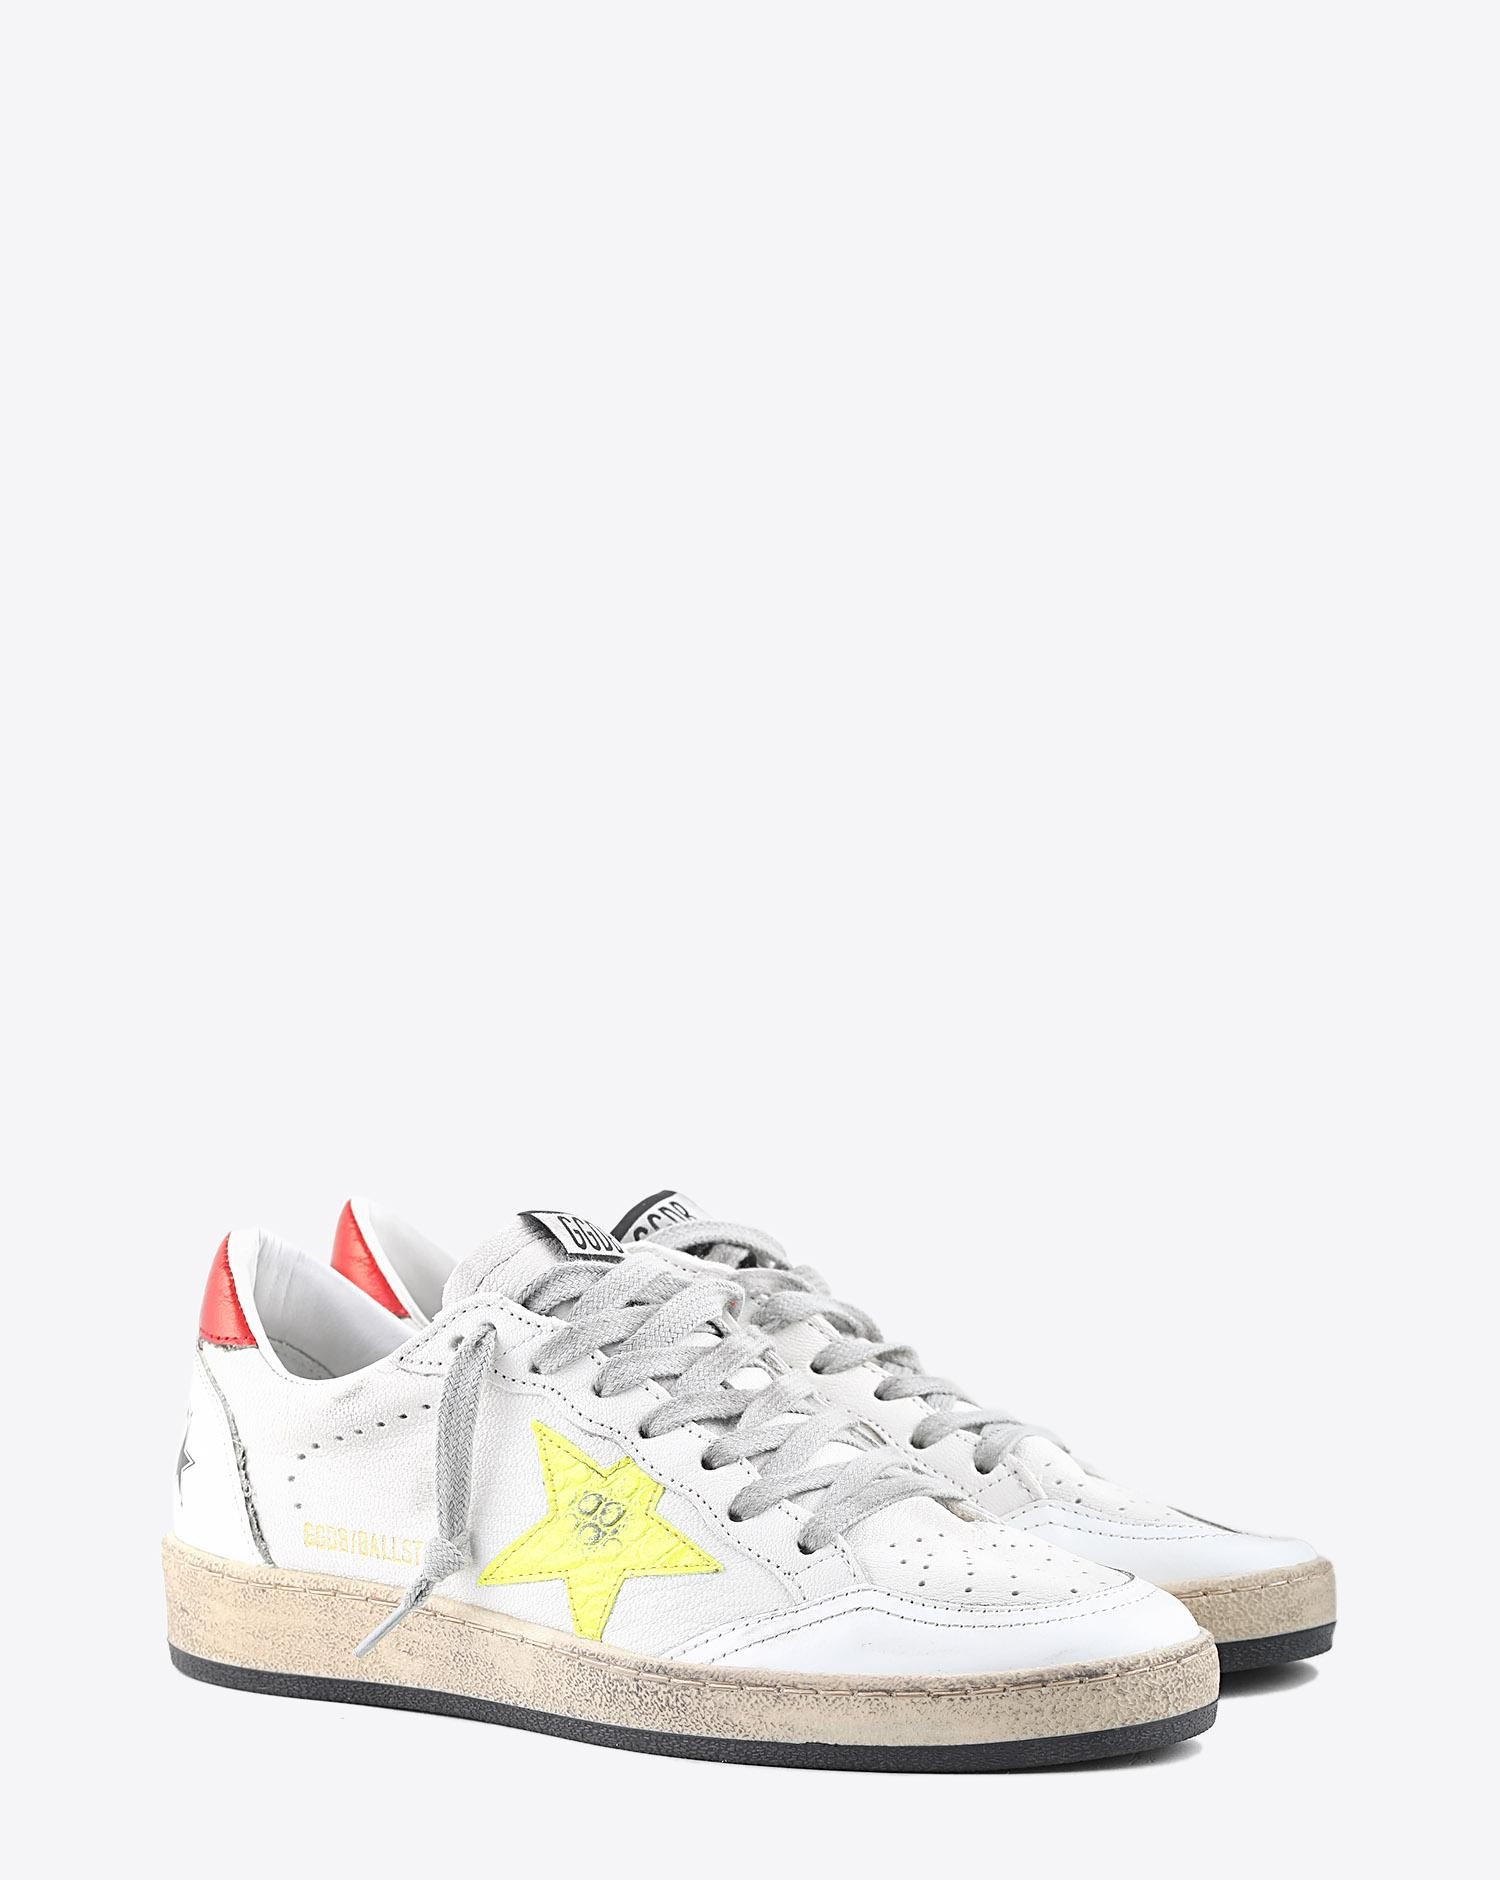 Golden Goose Woman Pré-Collection Ball Star - White Leather Yellow Fluo ...